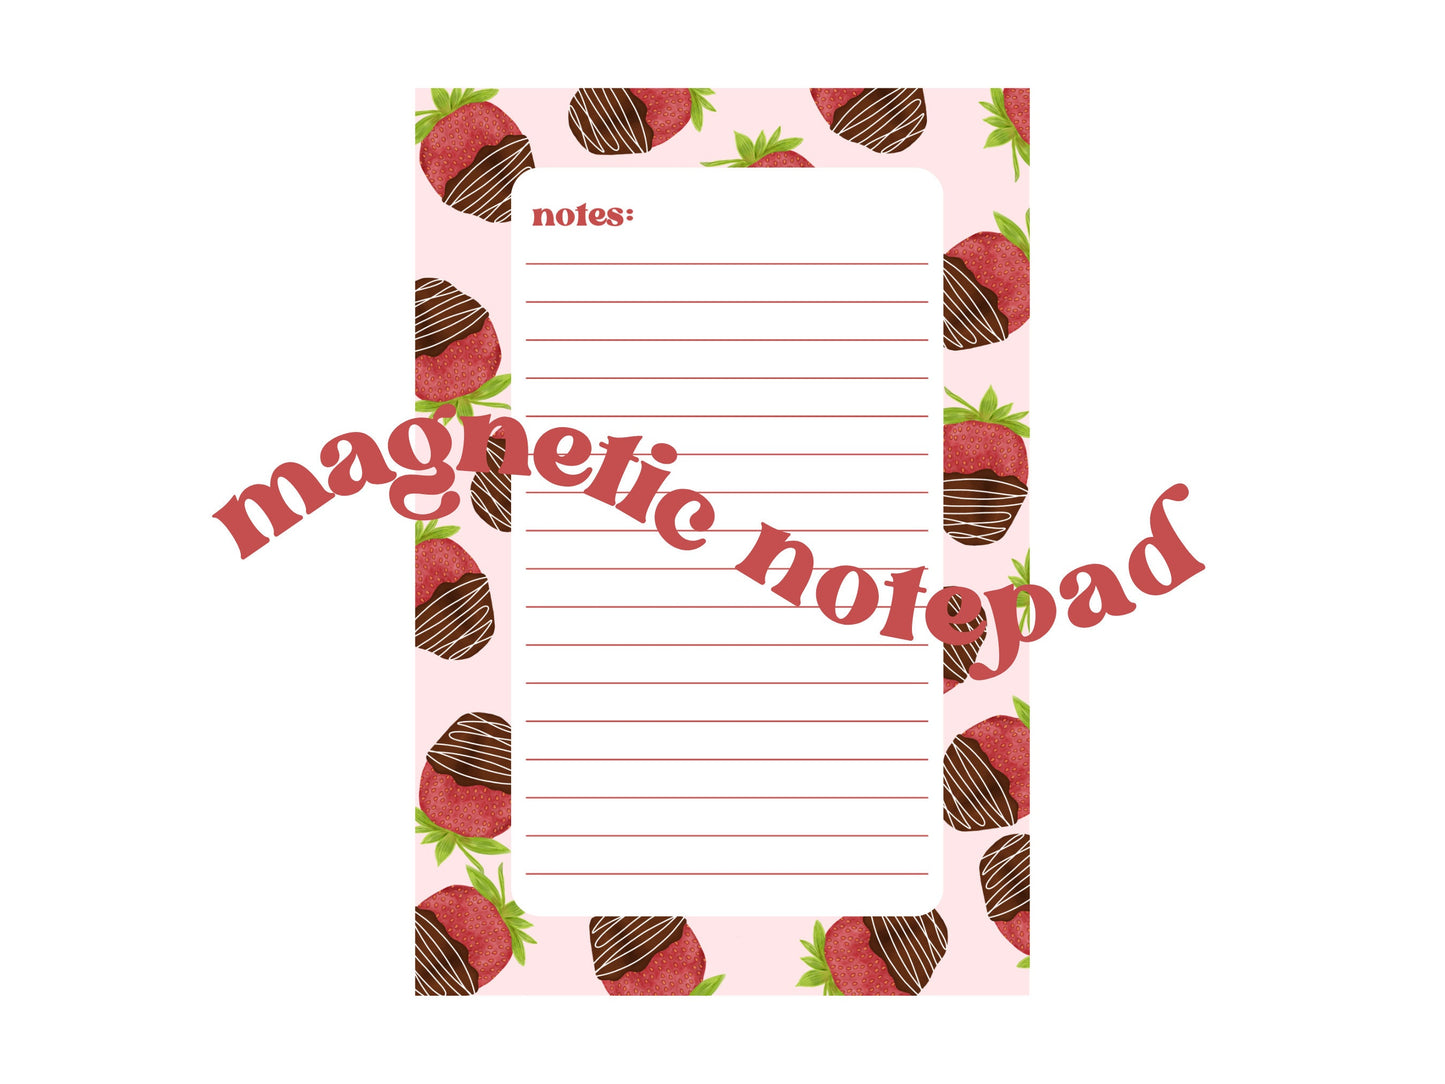 Magnetic Notepad Featuring Chocolate-Covered Strawberries